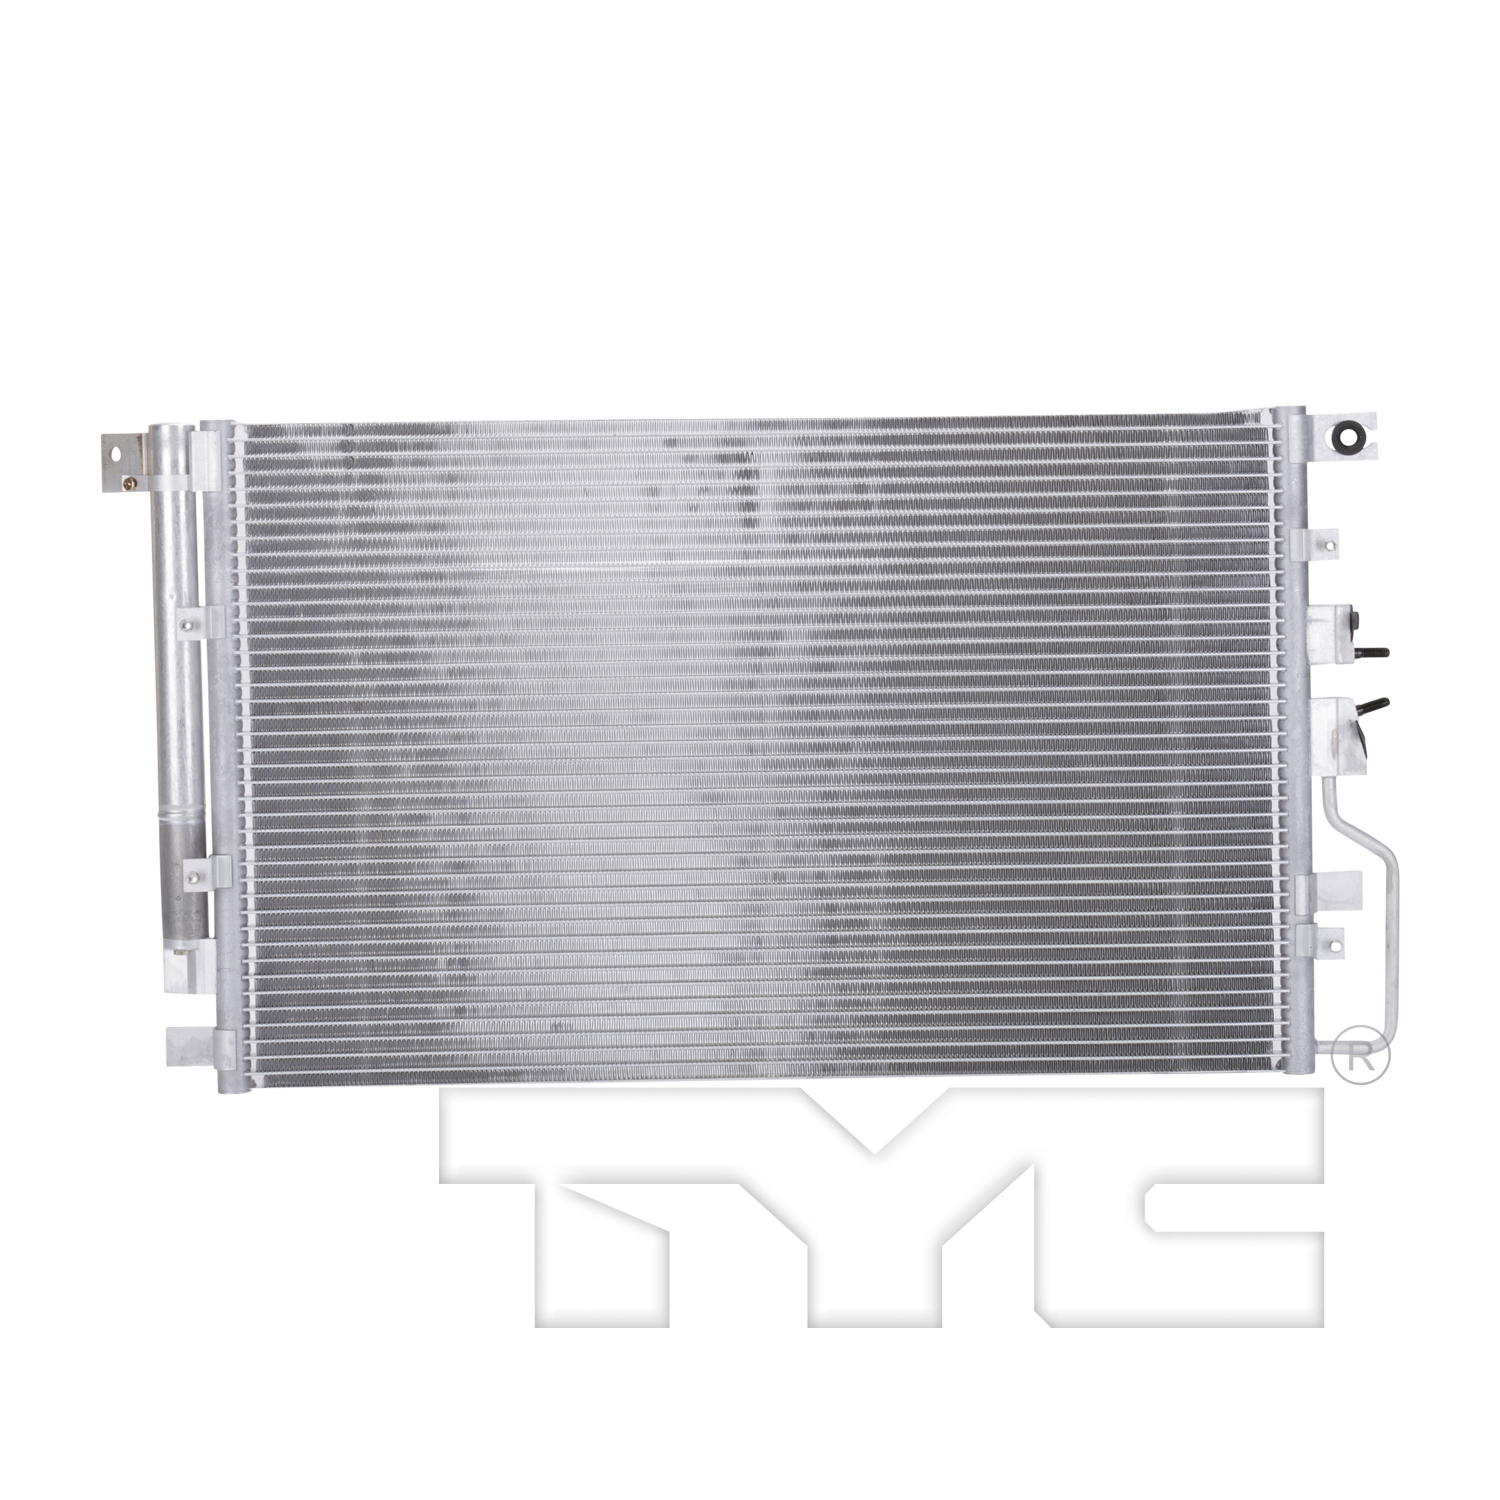 Aftermarket AC CONDENSERS for CHEVROLET - EQUINOX, EQUINOX,16-17,Air conditioning condenser